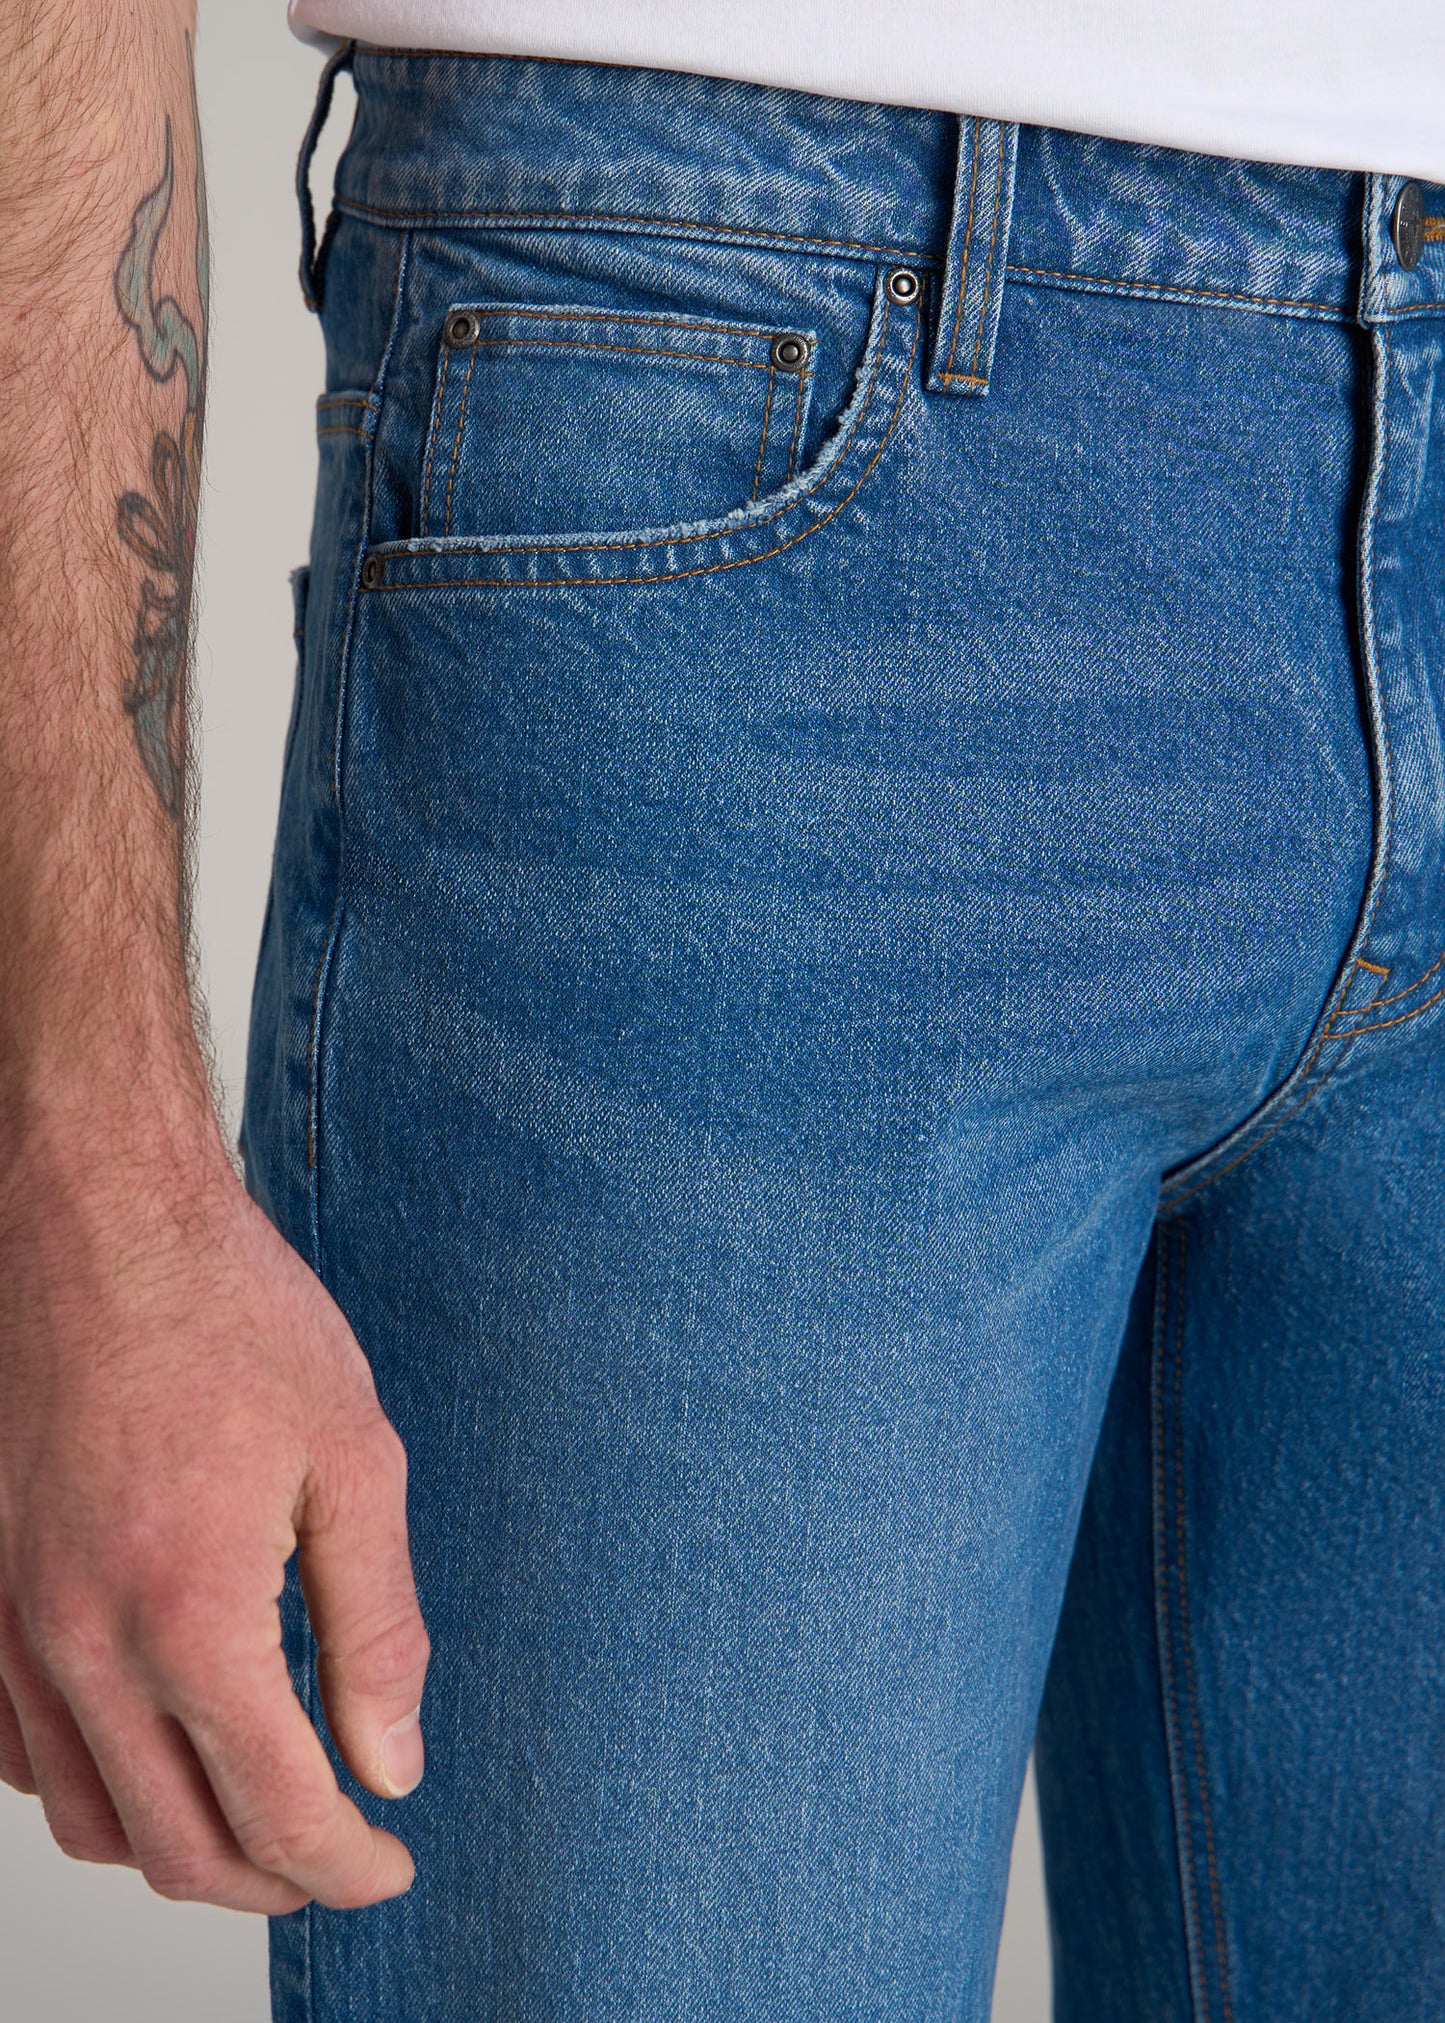 Milo RELAXED TAPERED FIT Jeans for Tall Men in Classic Mid Blue